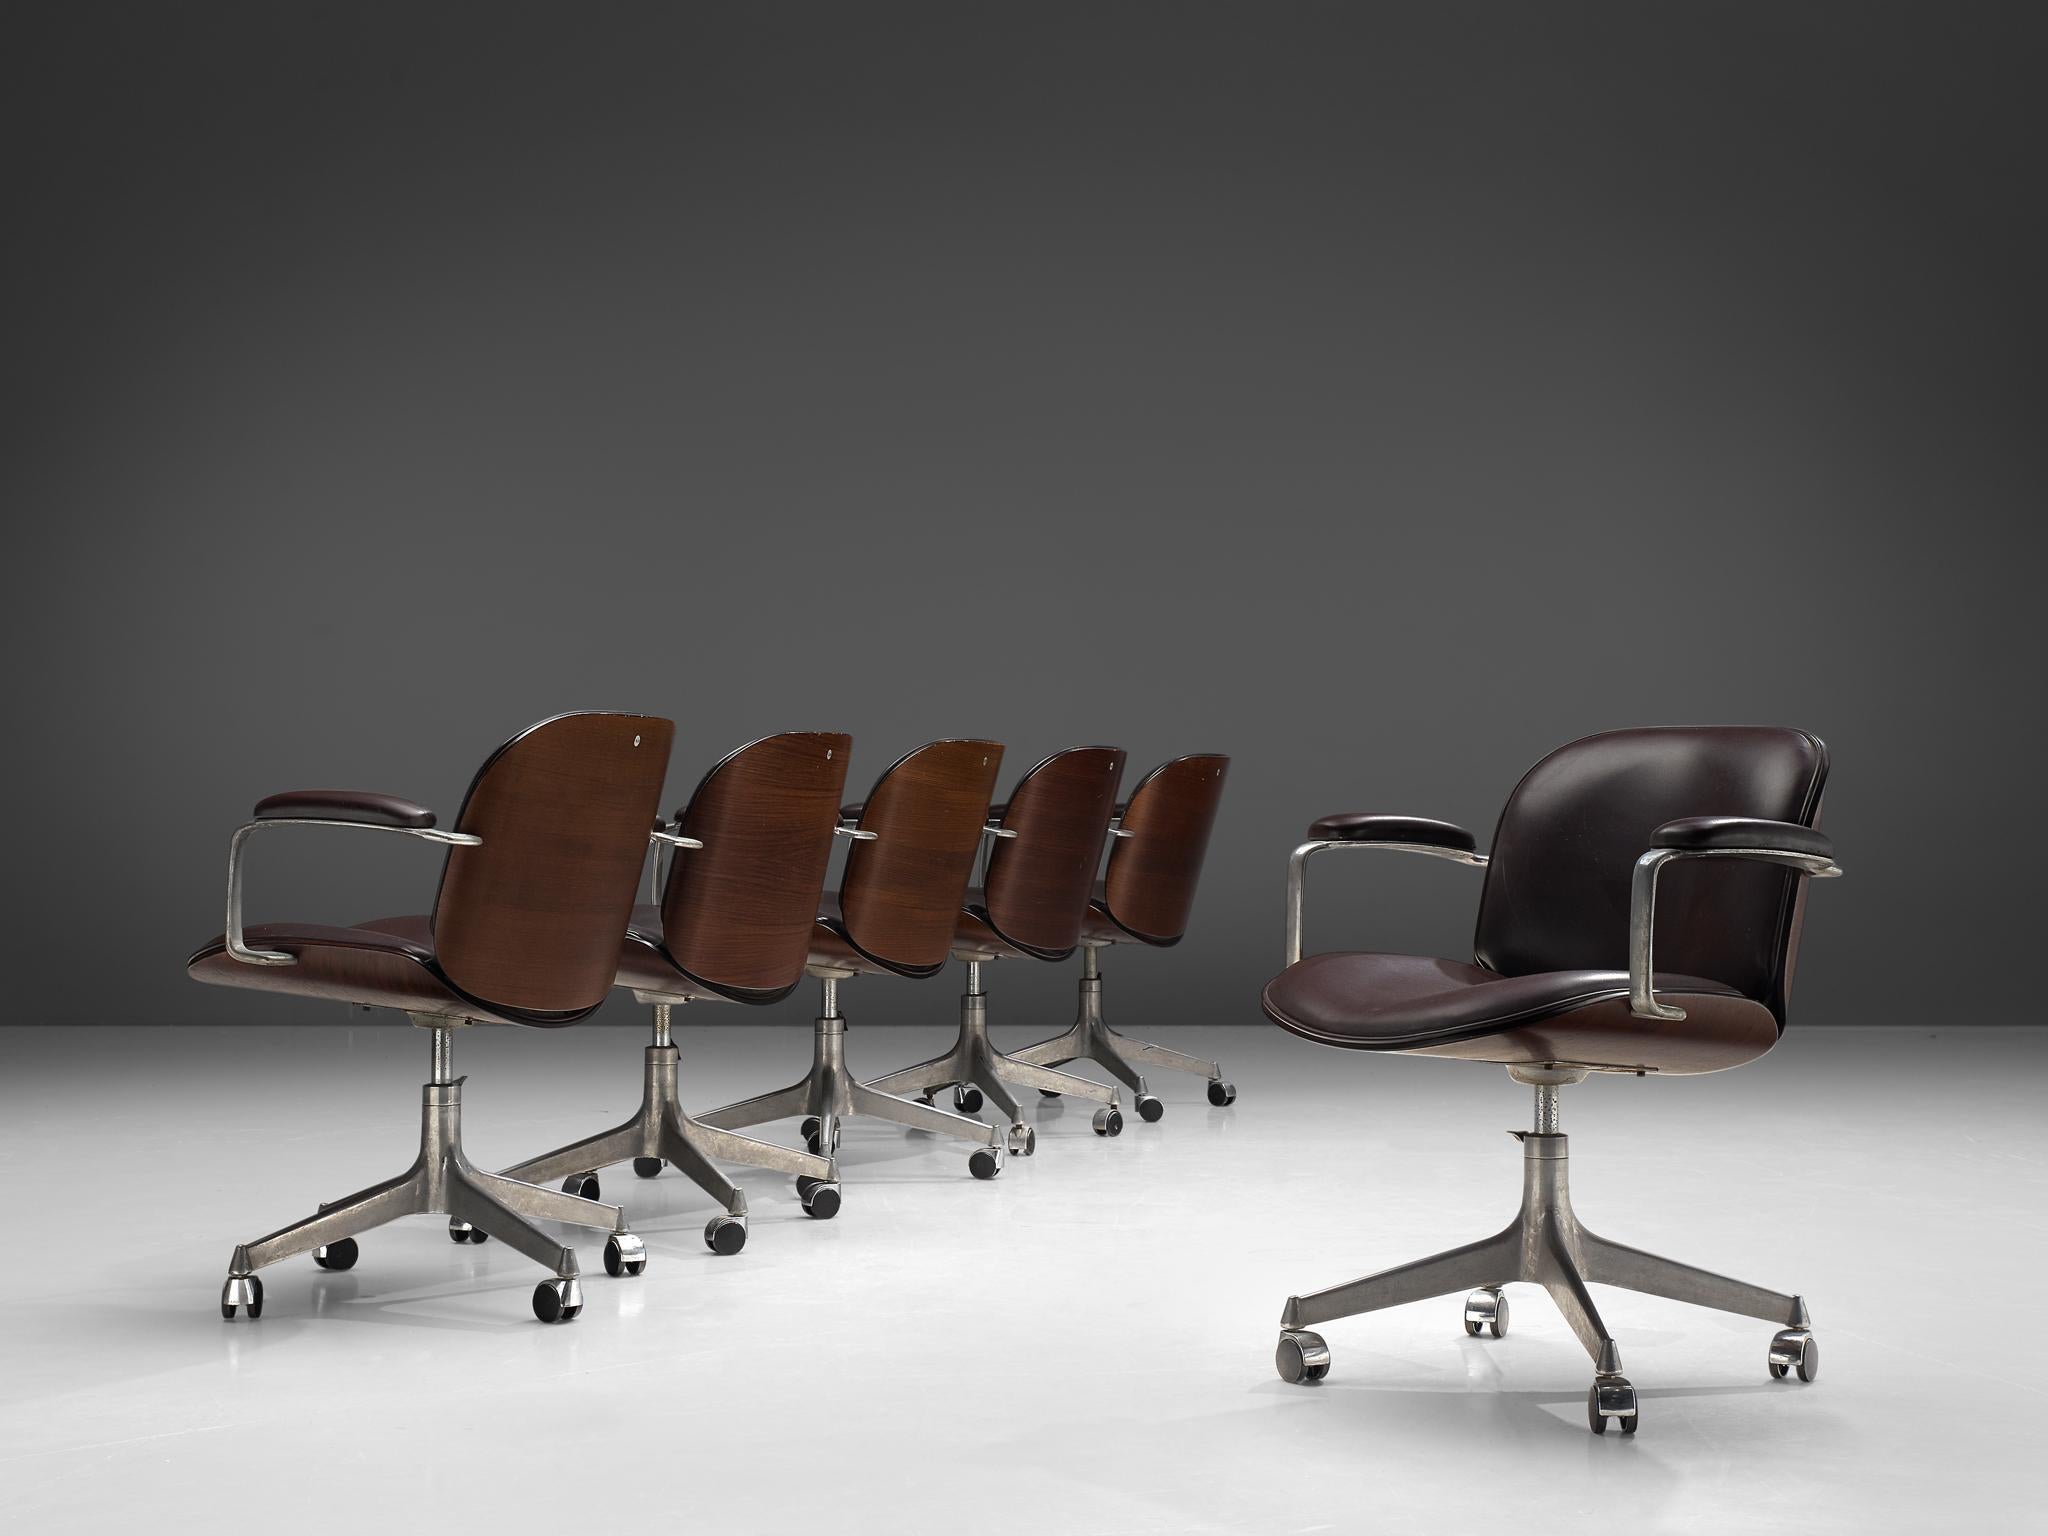 MIM Roma, set of six swivel desk chairs, rosewood, metal, brown faux leather, Italy, 1950s.

Set of six swivel office chairs from the 'Terni' series by MIM Roma. Seating and back are slightly curved and both halves are mirrored creating a vibrant